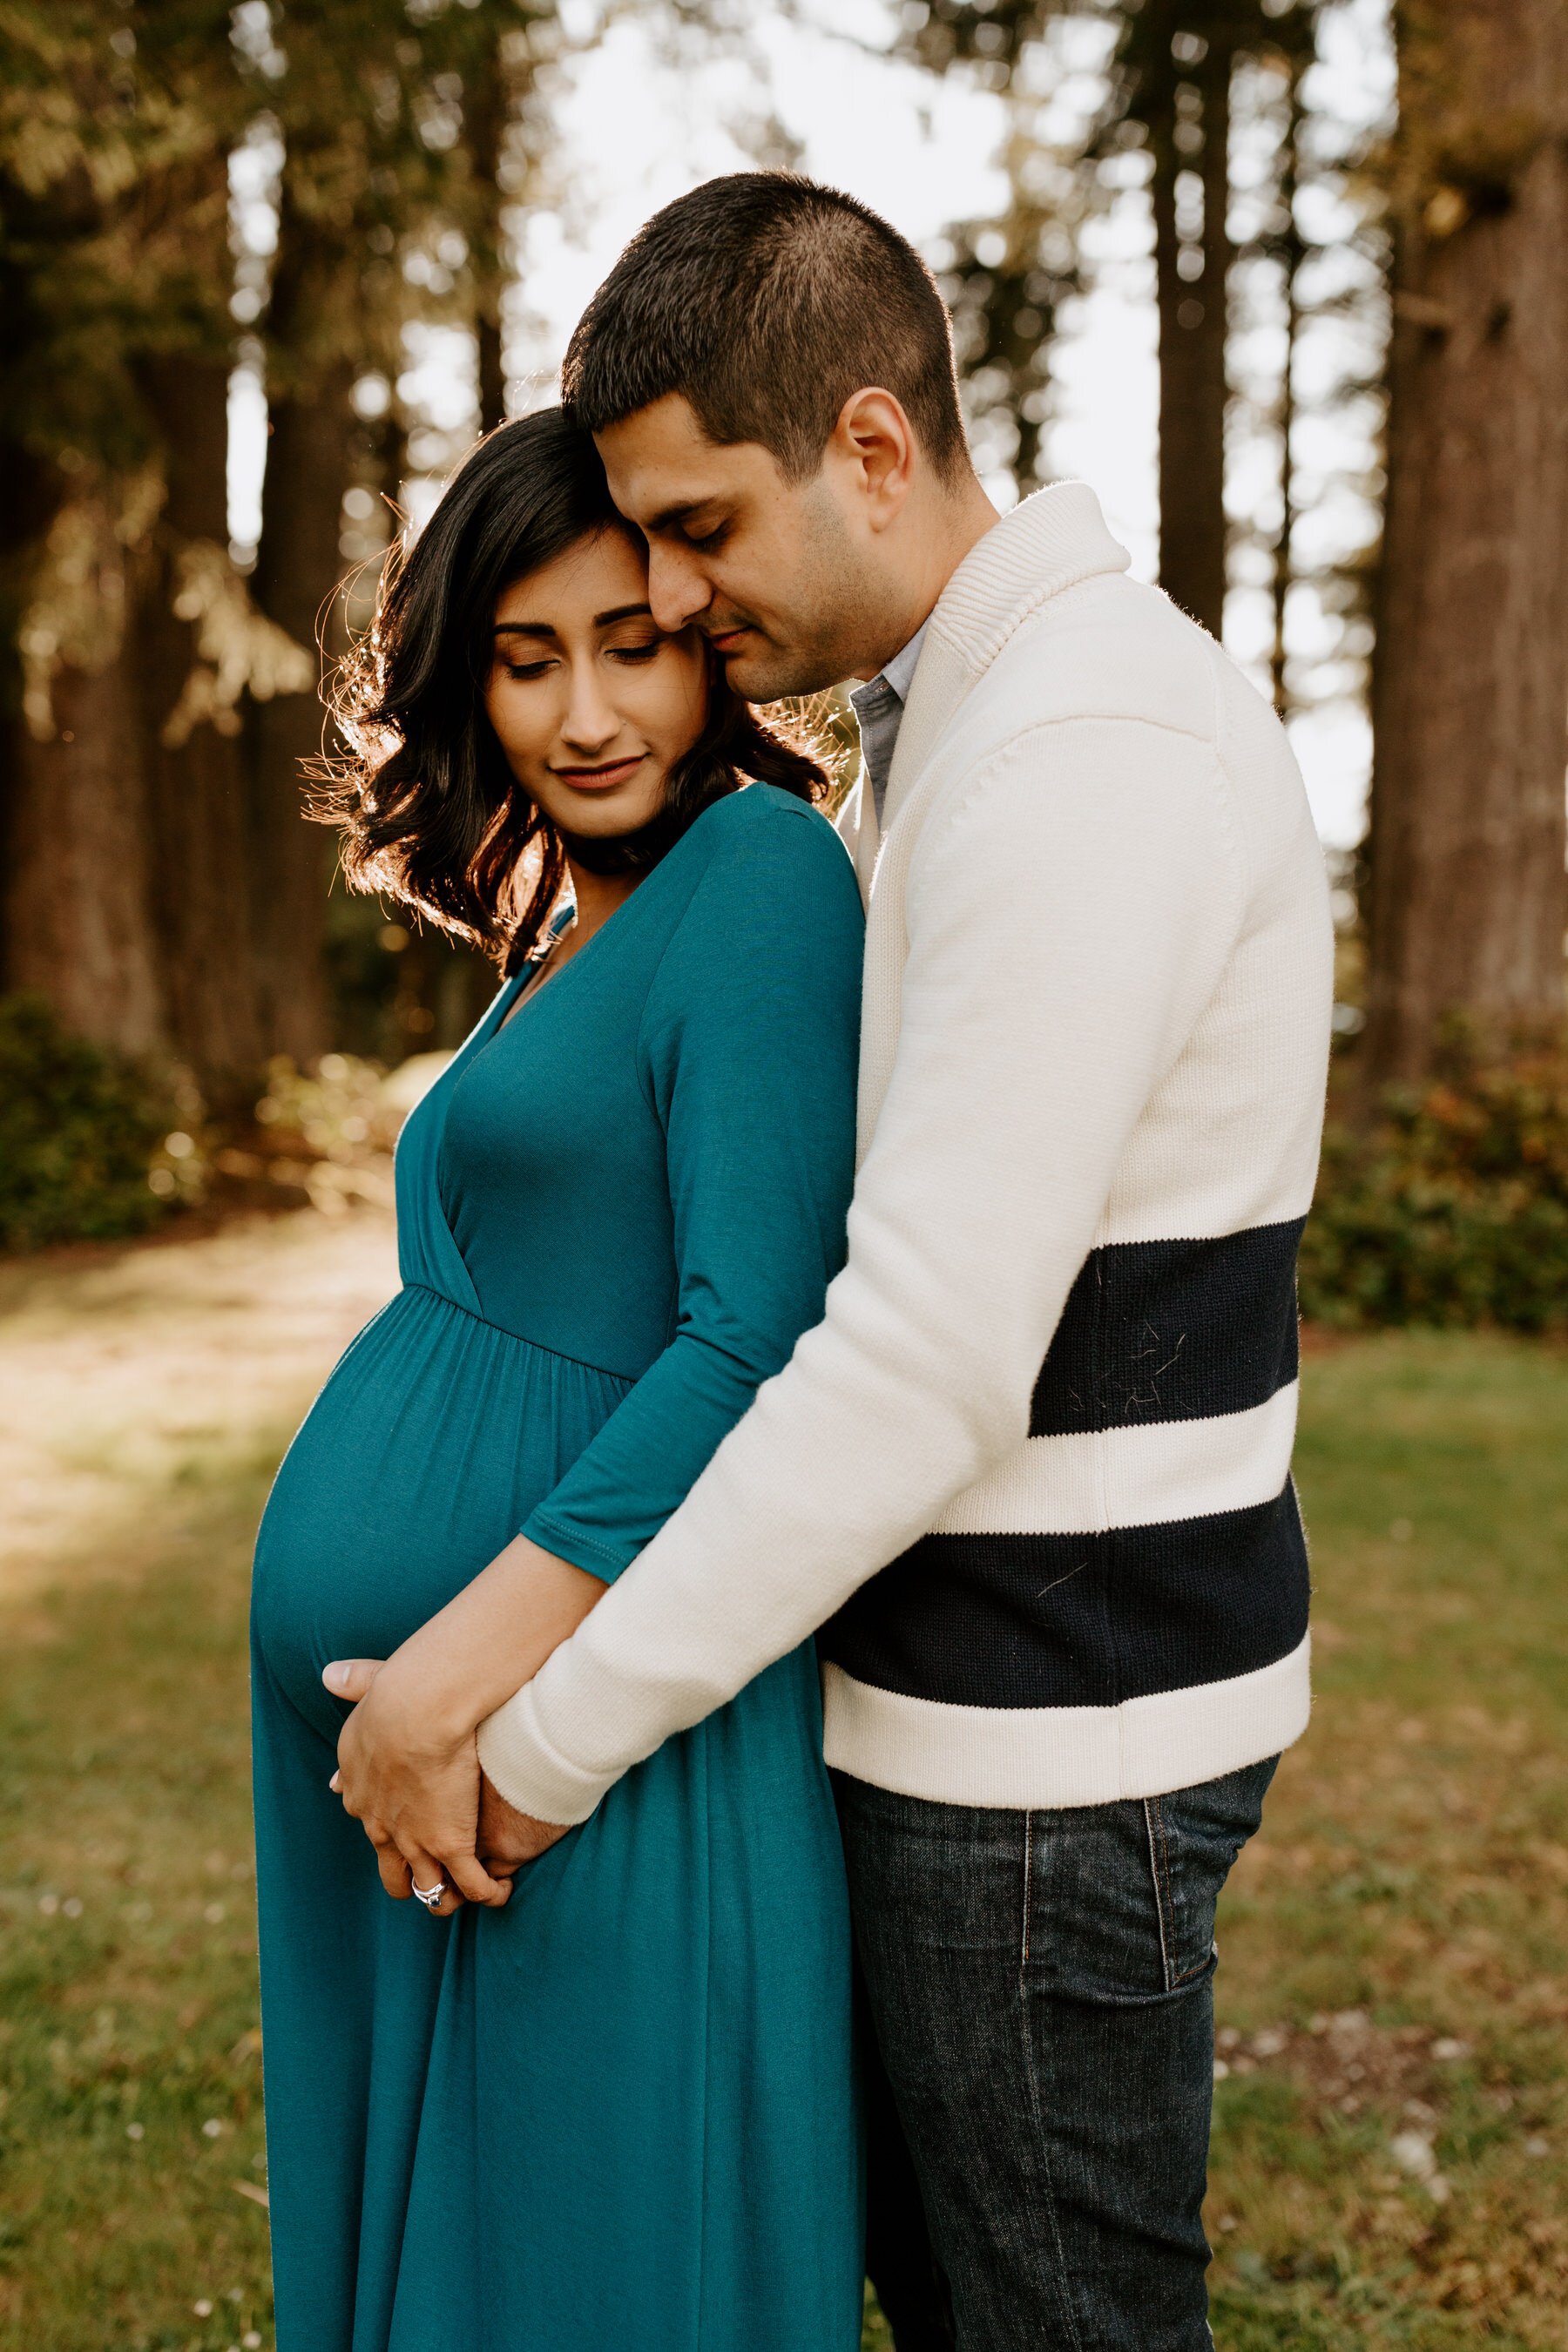 Seattle Maternity Photos | Outdoor forest golden hour maternity session at Lake Wilderness Park in Maple Valley, WA | Tida Svy | www.tidasvy.com